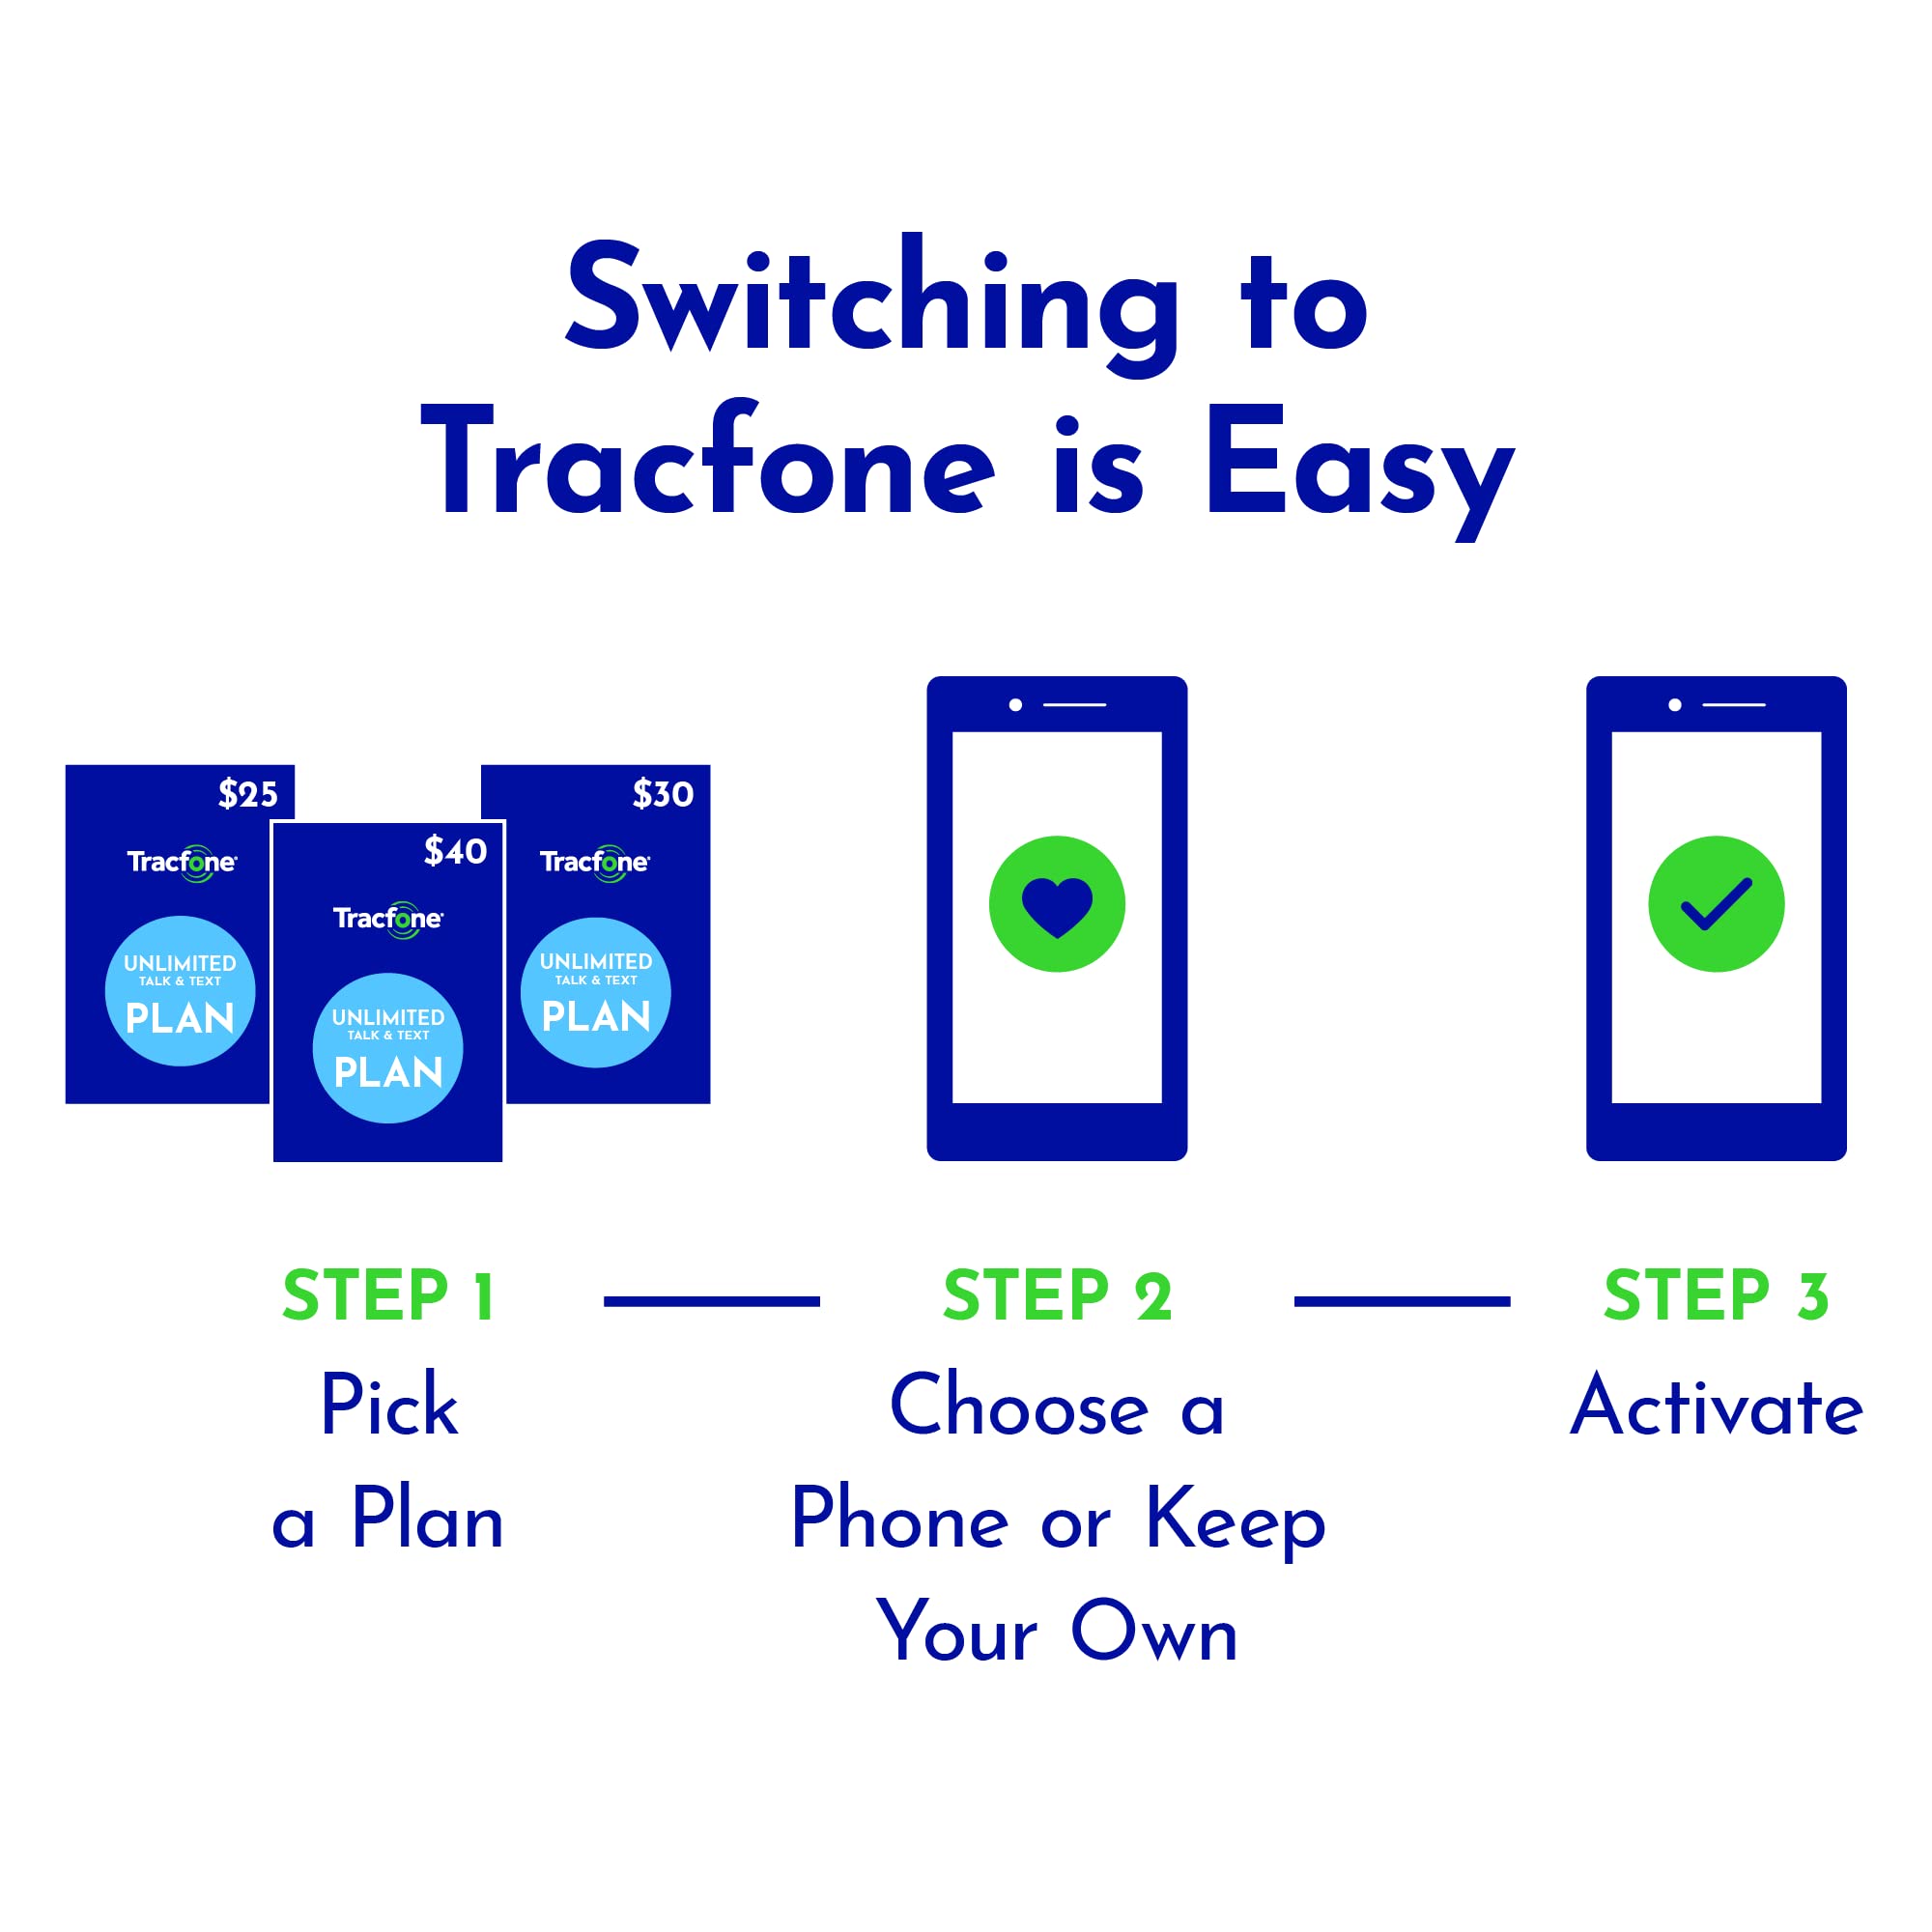 Tracfone 1 Year Prepaid Wireless Phone Plans - Pay As You Go